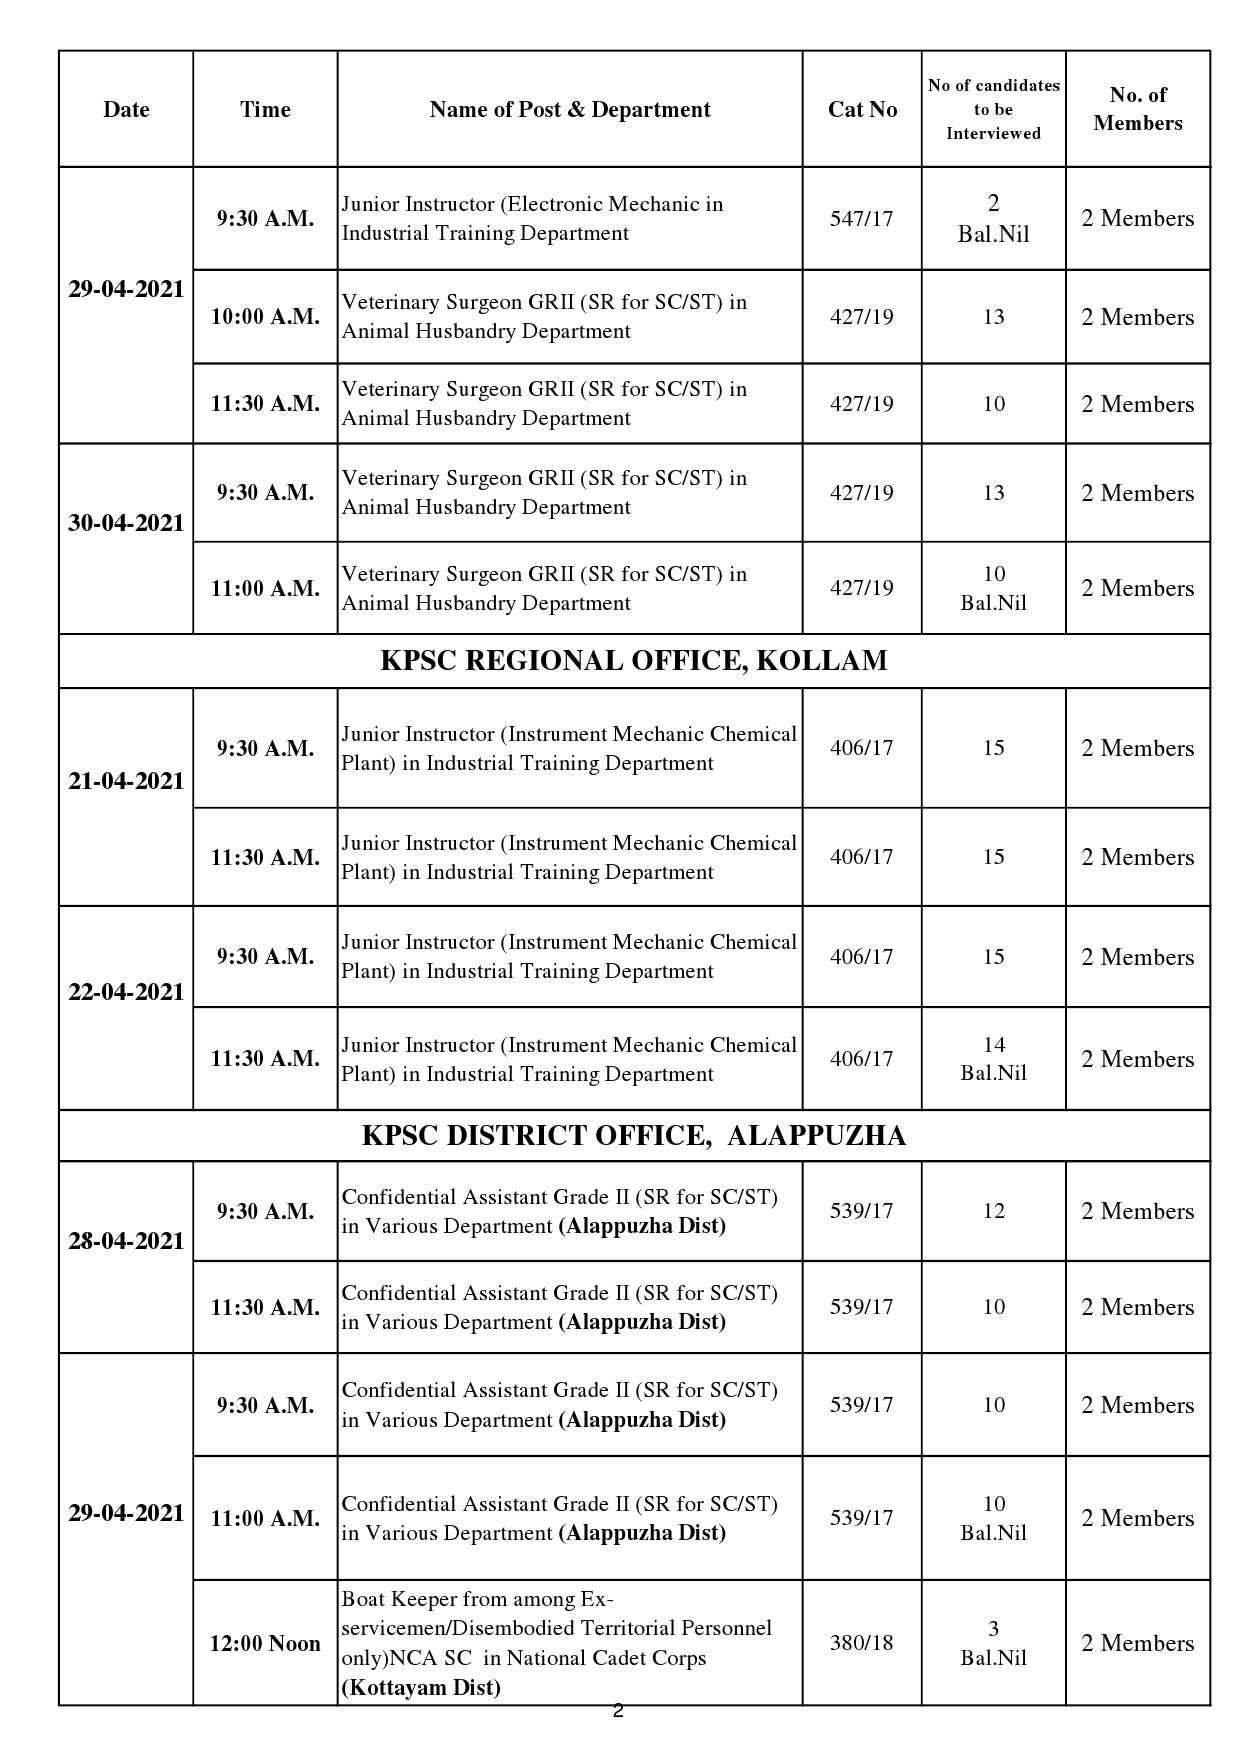 REVISED INTERVIEW PROGRAMME FOR THE MONTH OF APRIL 2021 - Notification Image 2